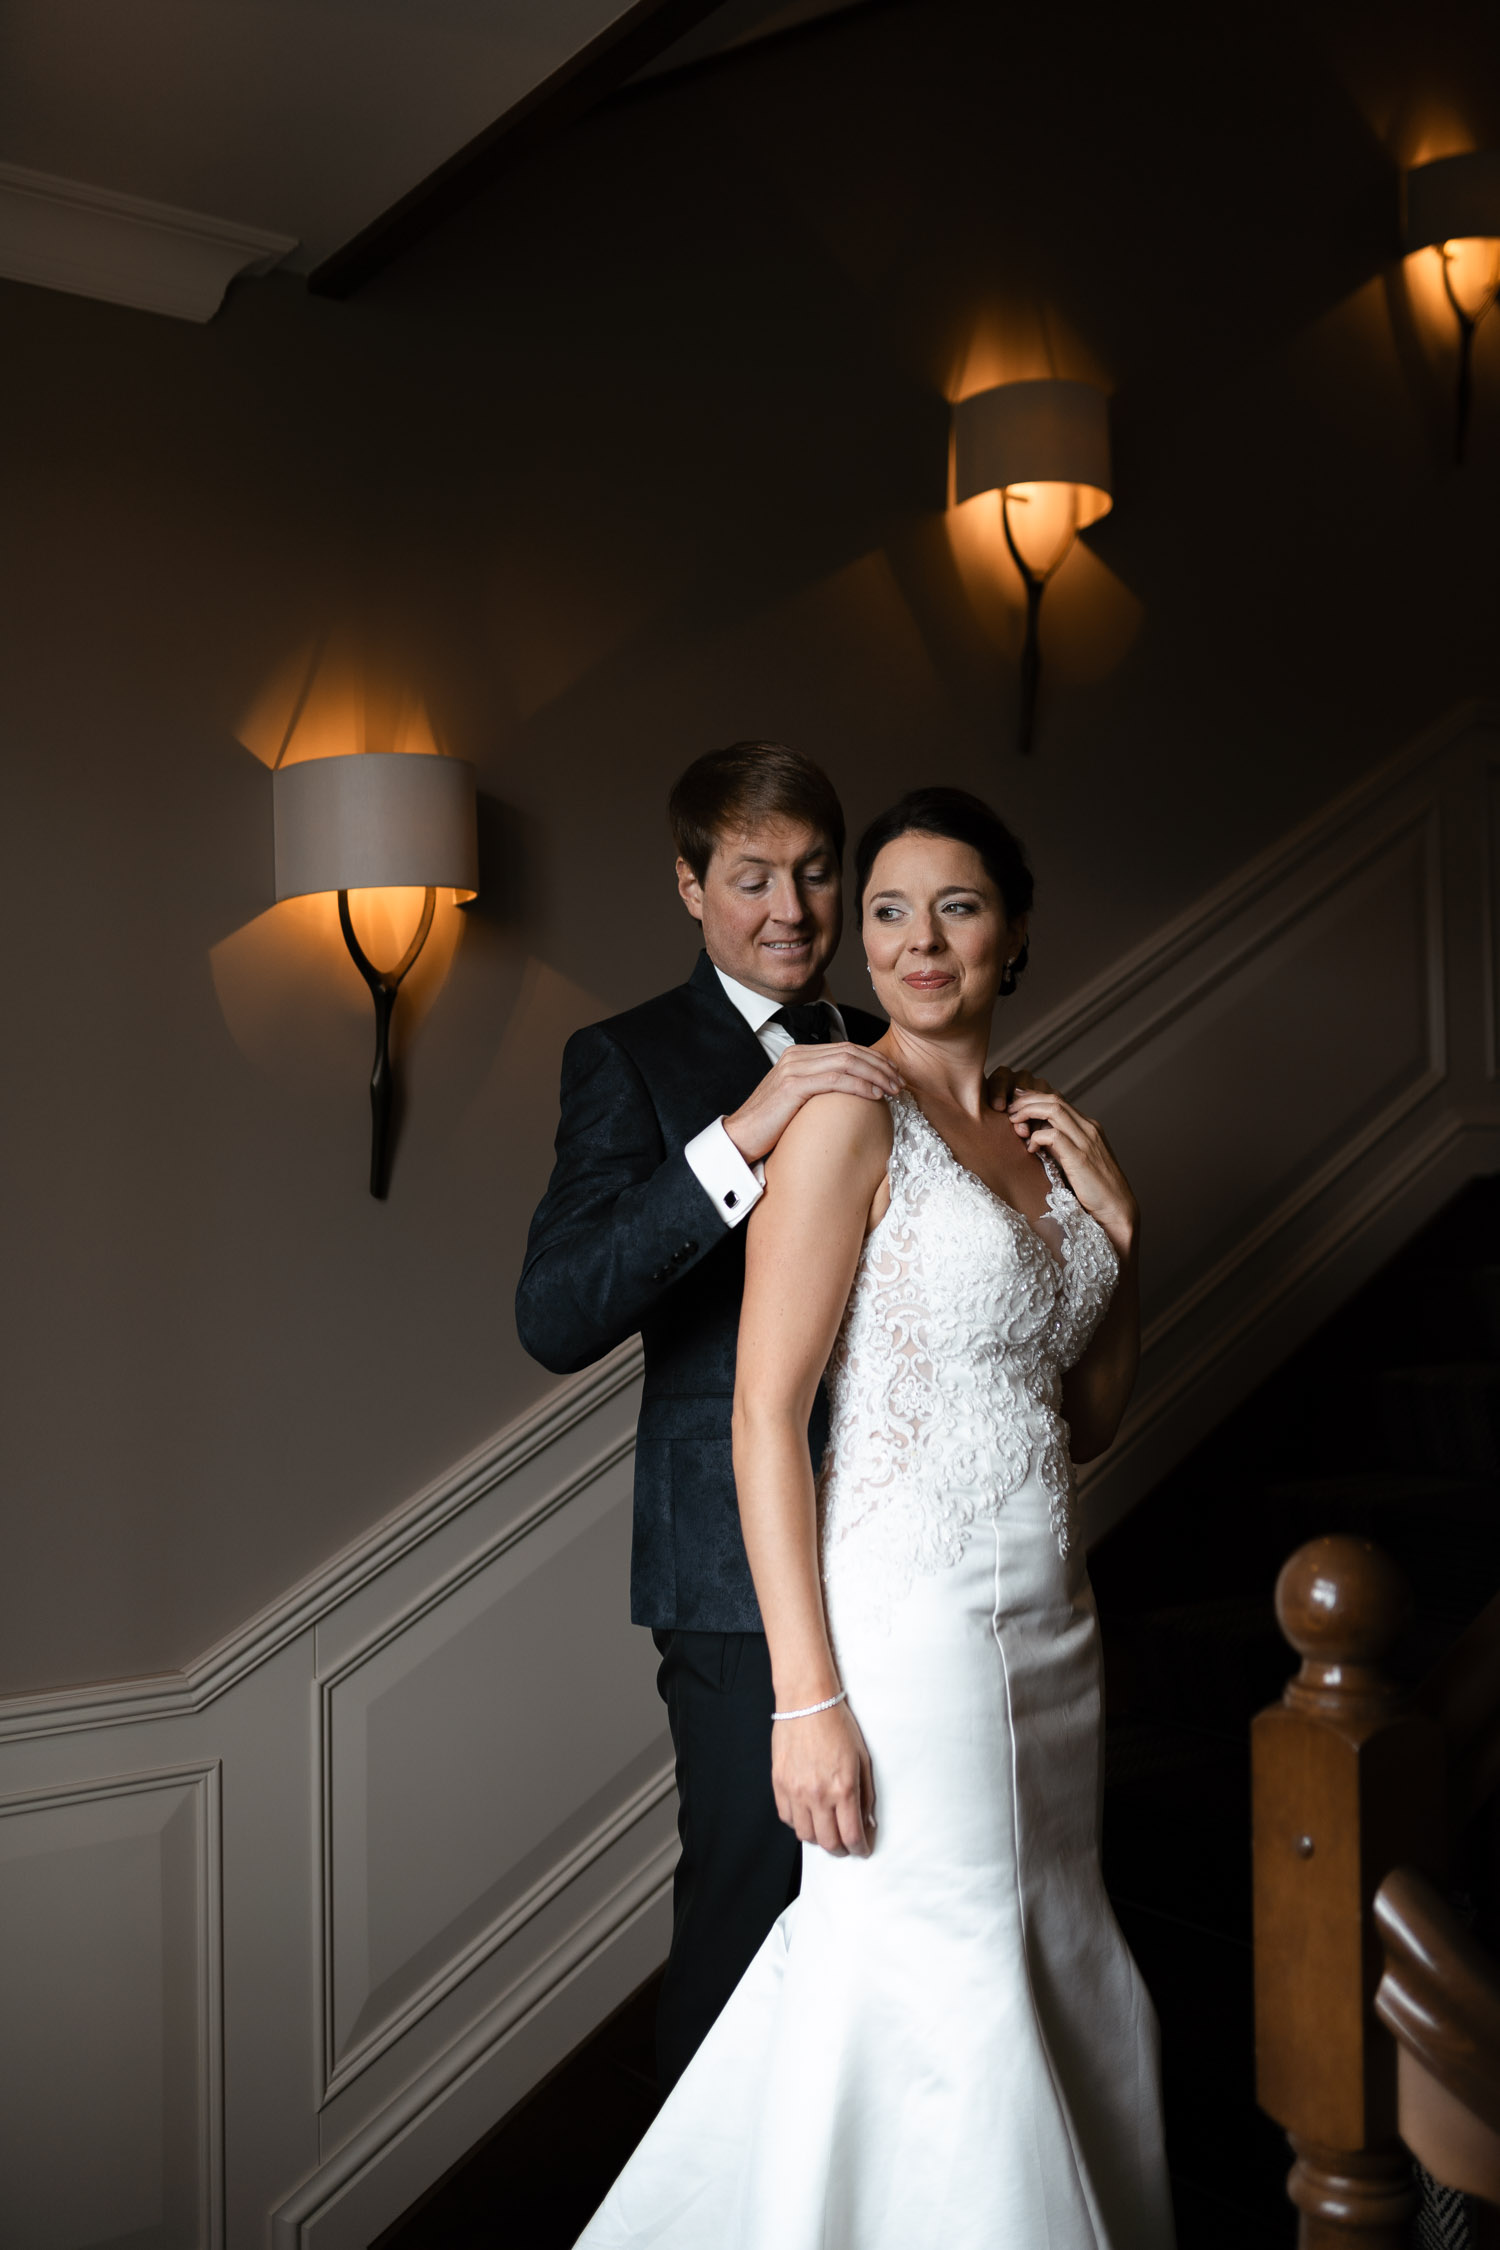 Photoshoot of bridal couple at Villa Honegg for a wedding in the Ennetbürgen chapel